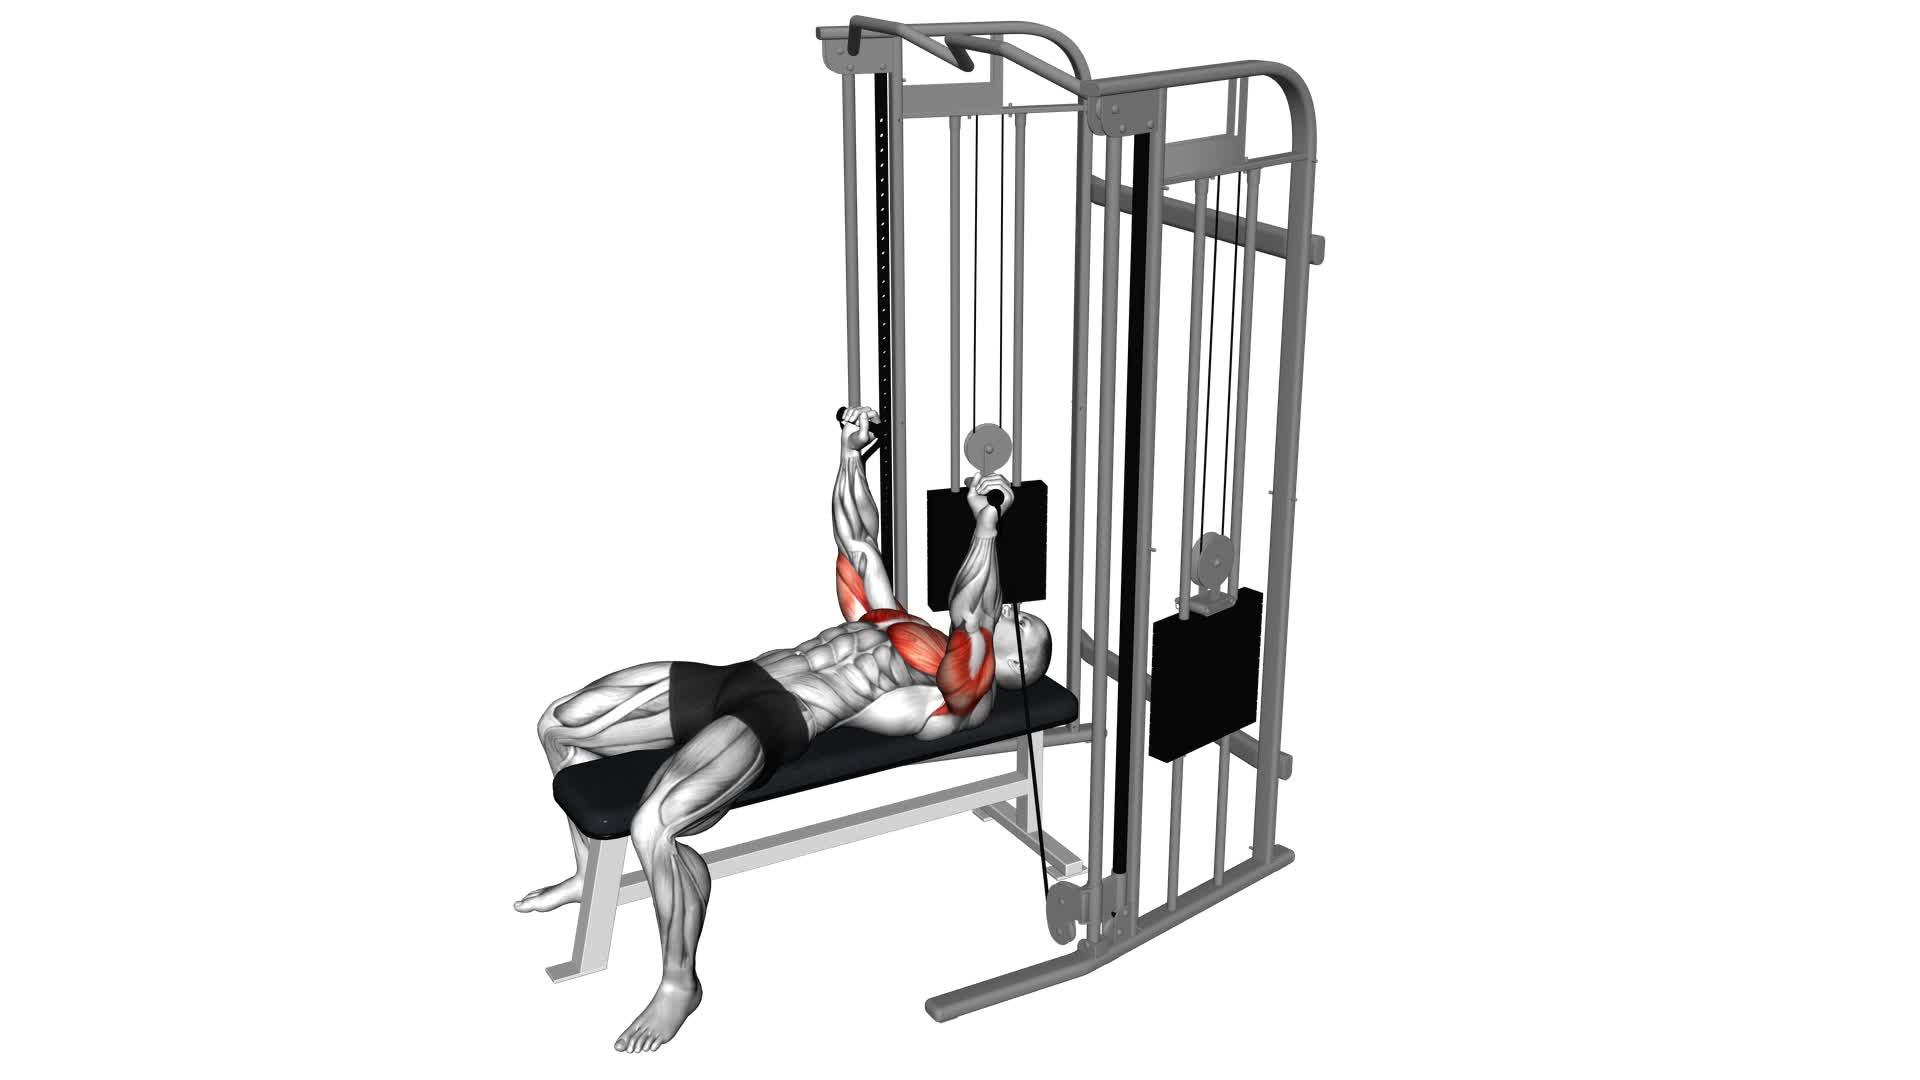 Cable Bench Press - Video Exercise Guide & Tips